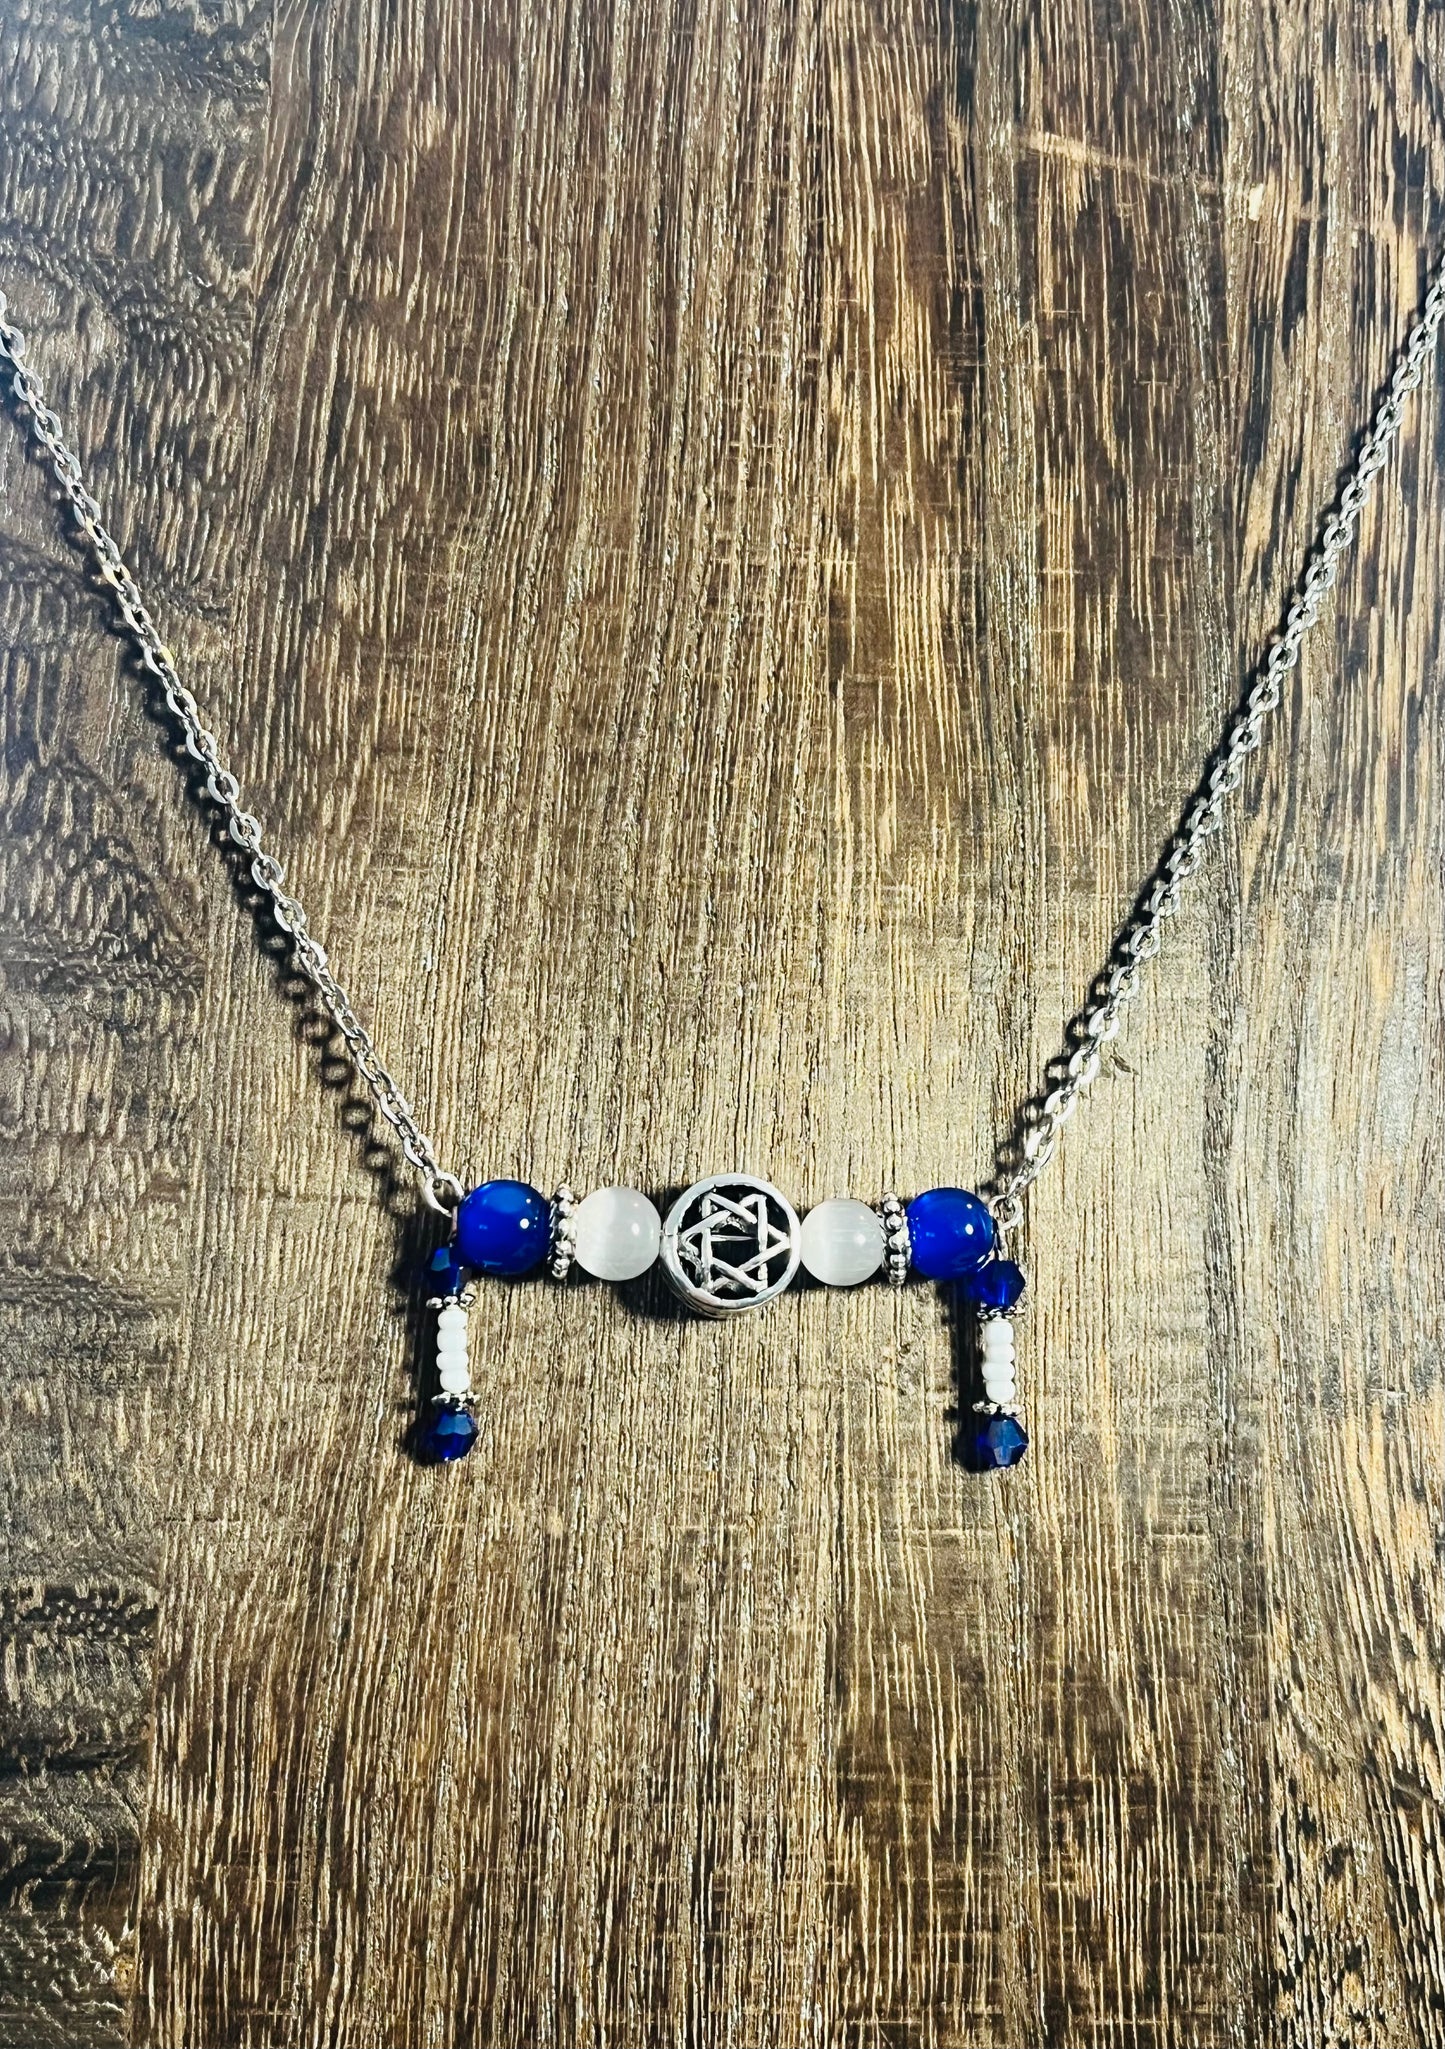 Support Israel Necklace